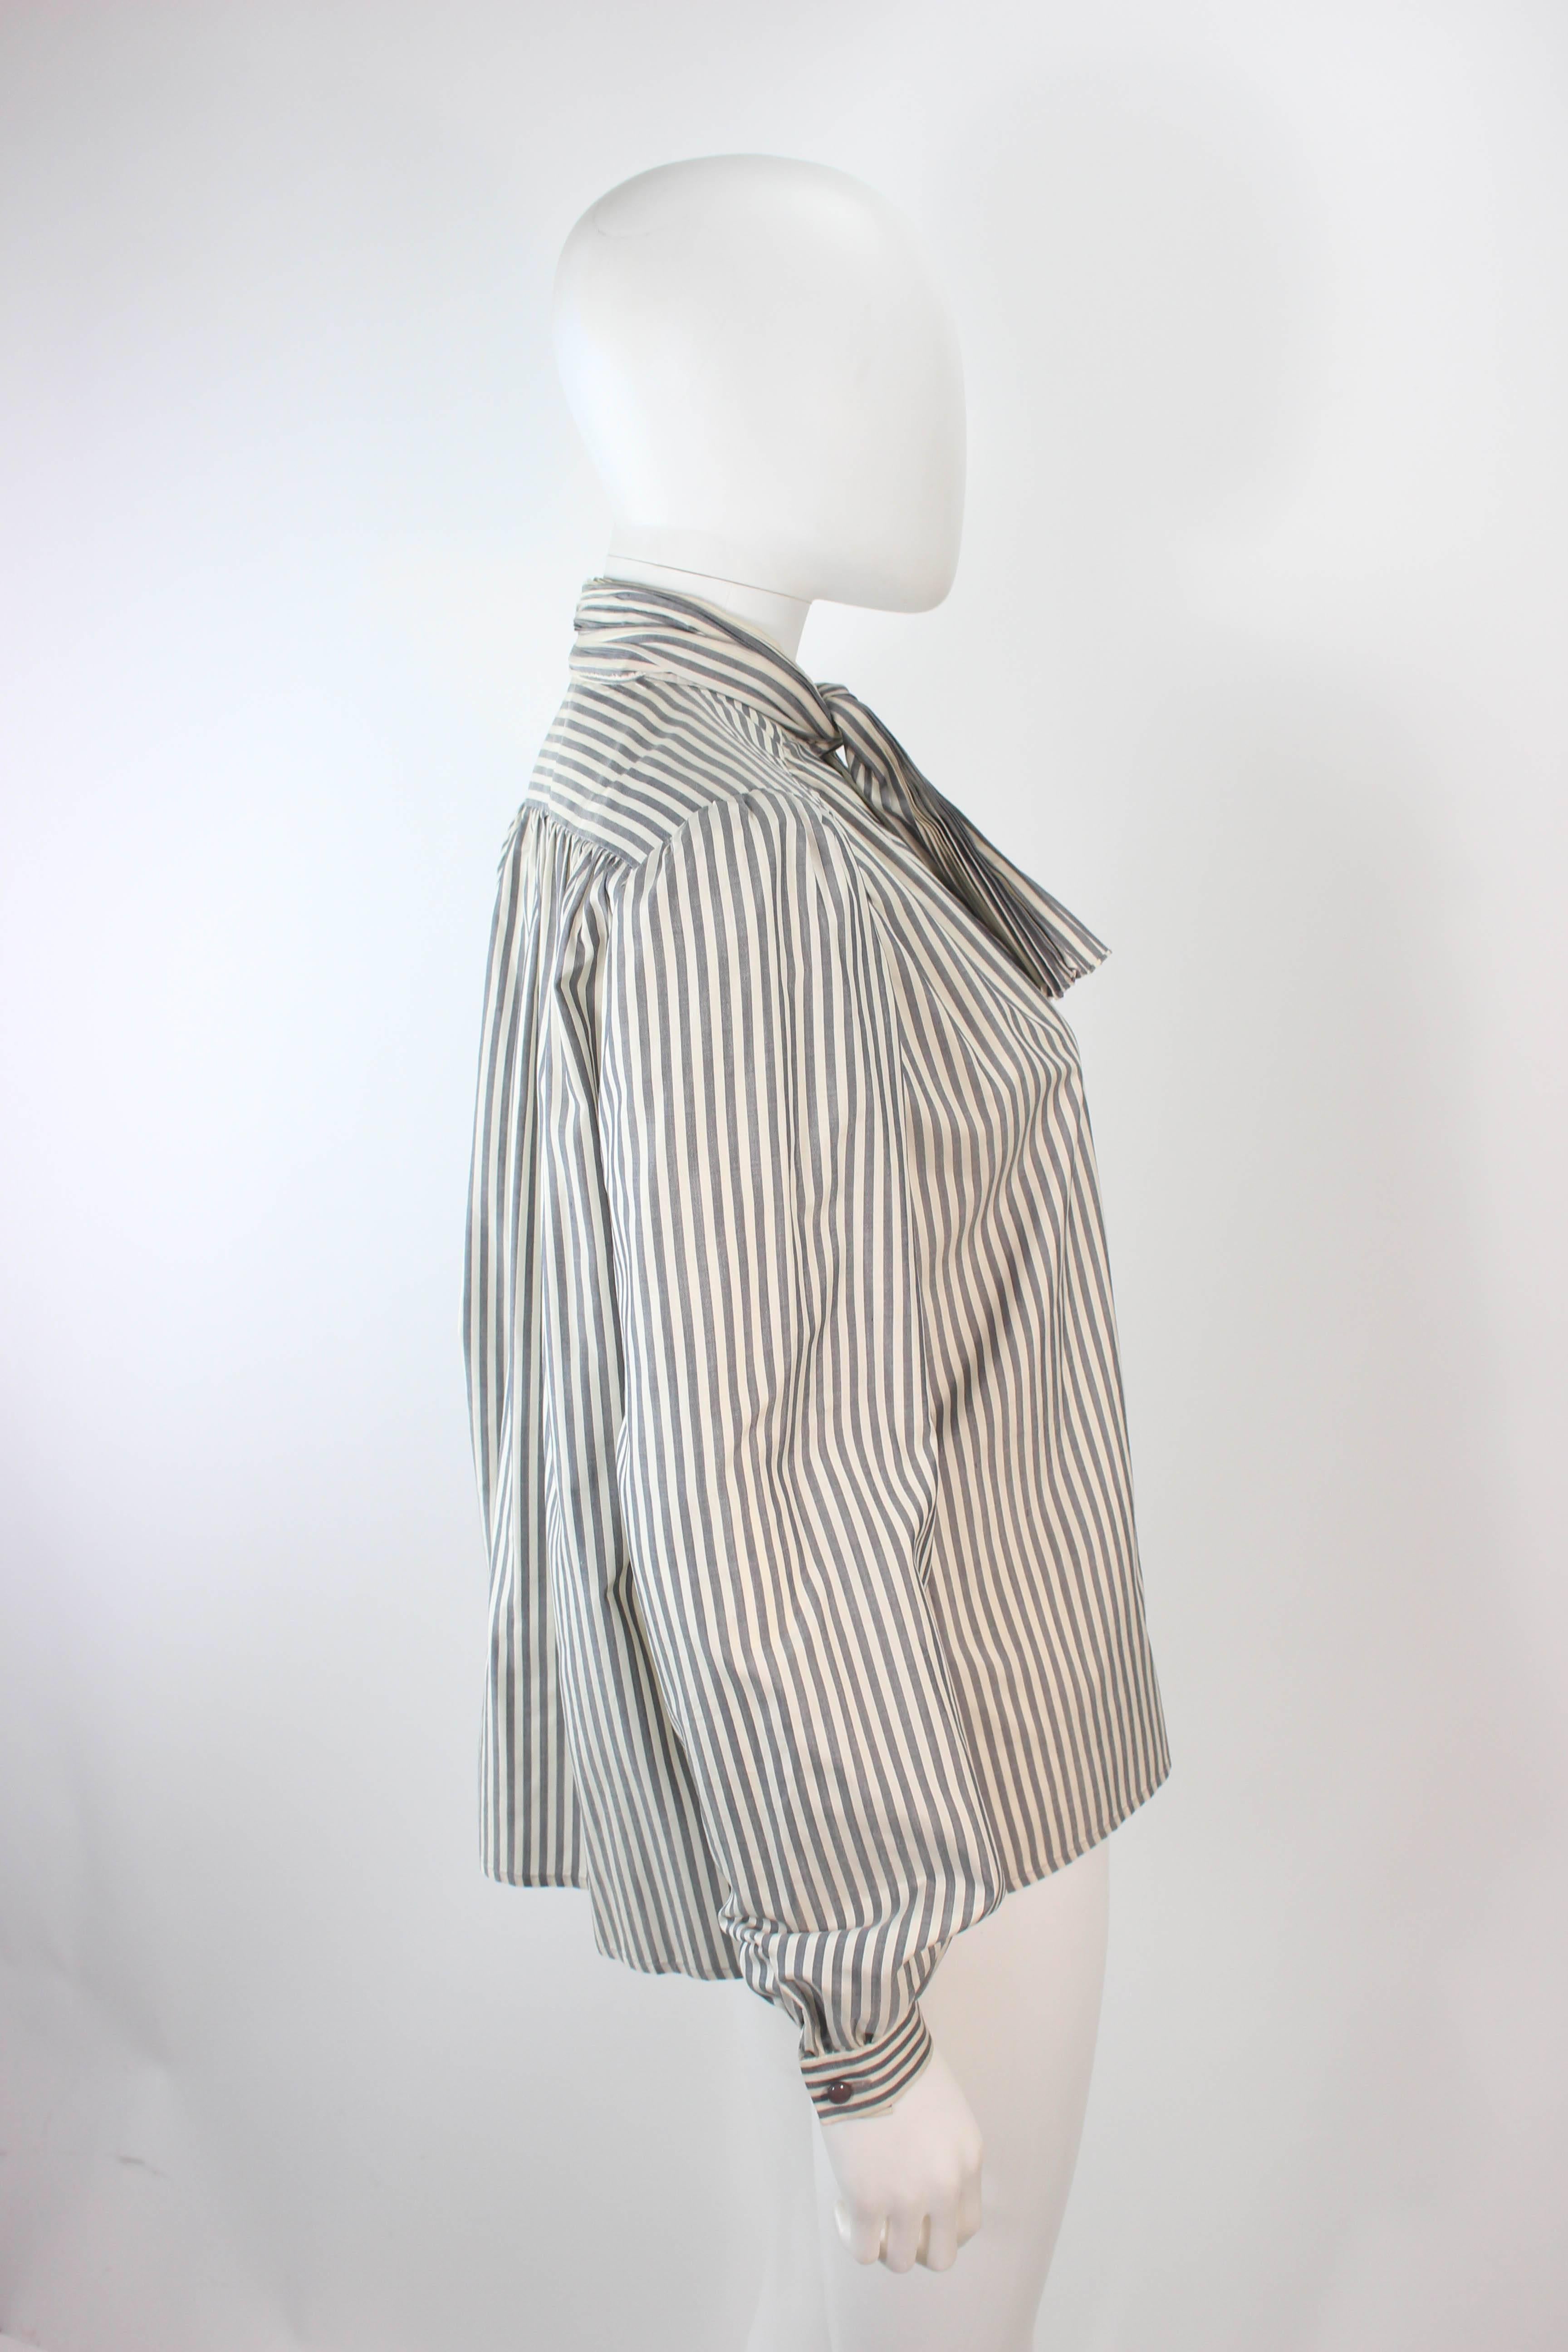 Women's VALENTINO Vintage Blue and White Pinstripe Blouse with Pleated Bow Size 6 For Sale